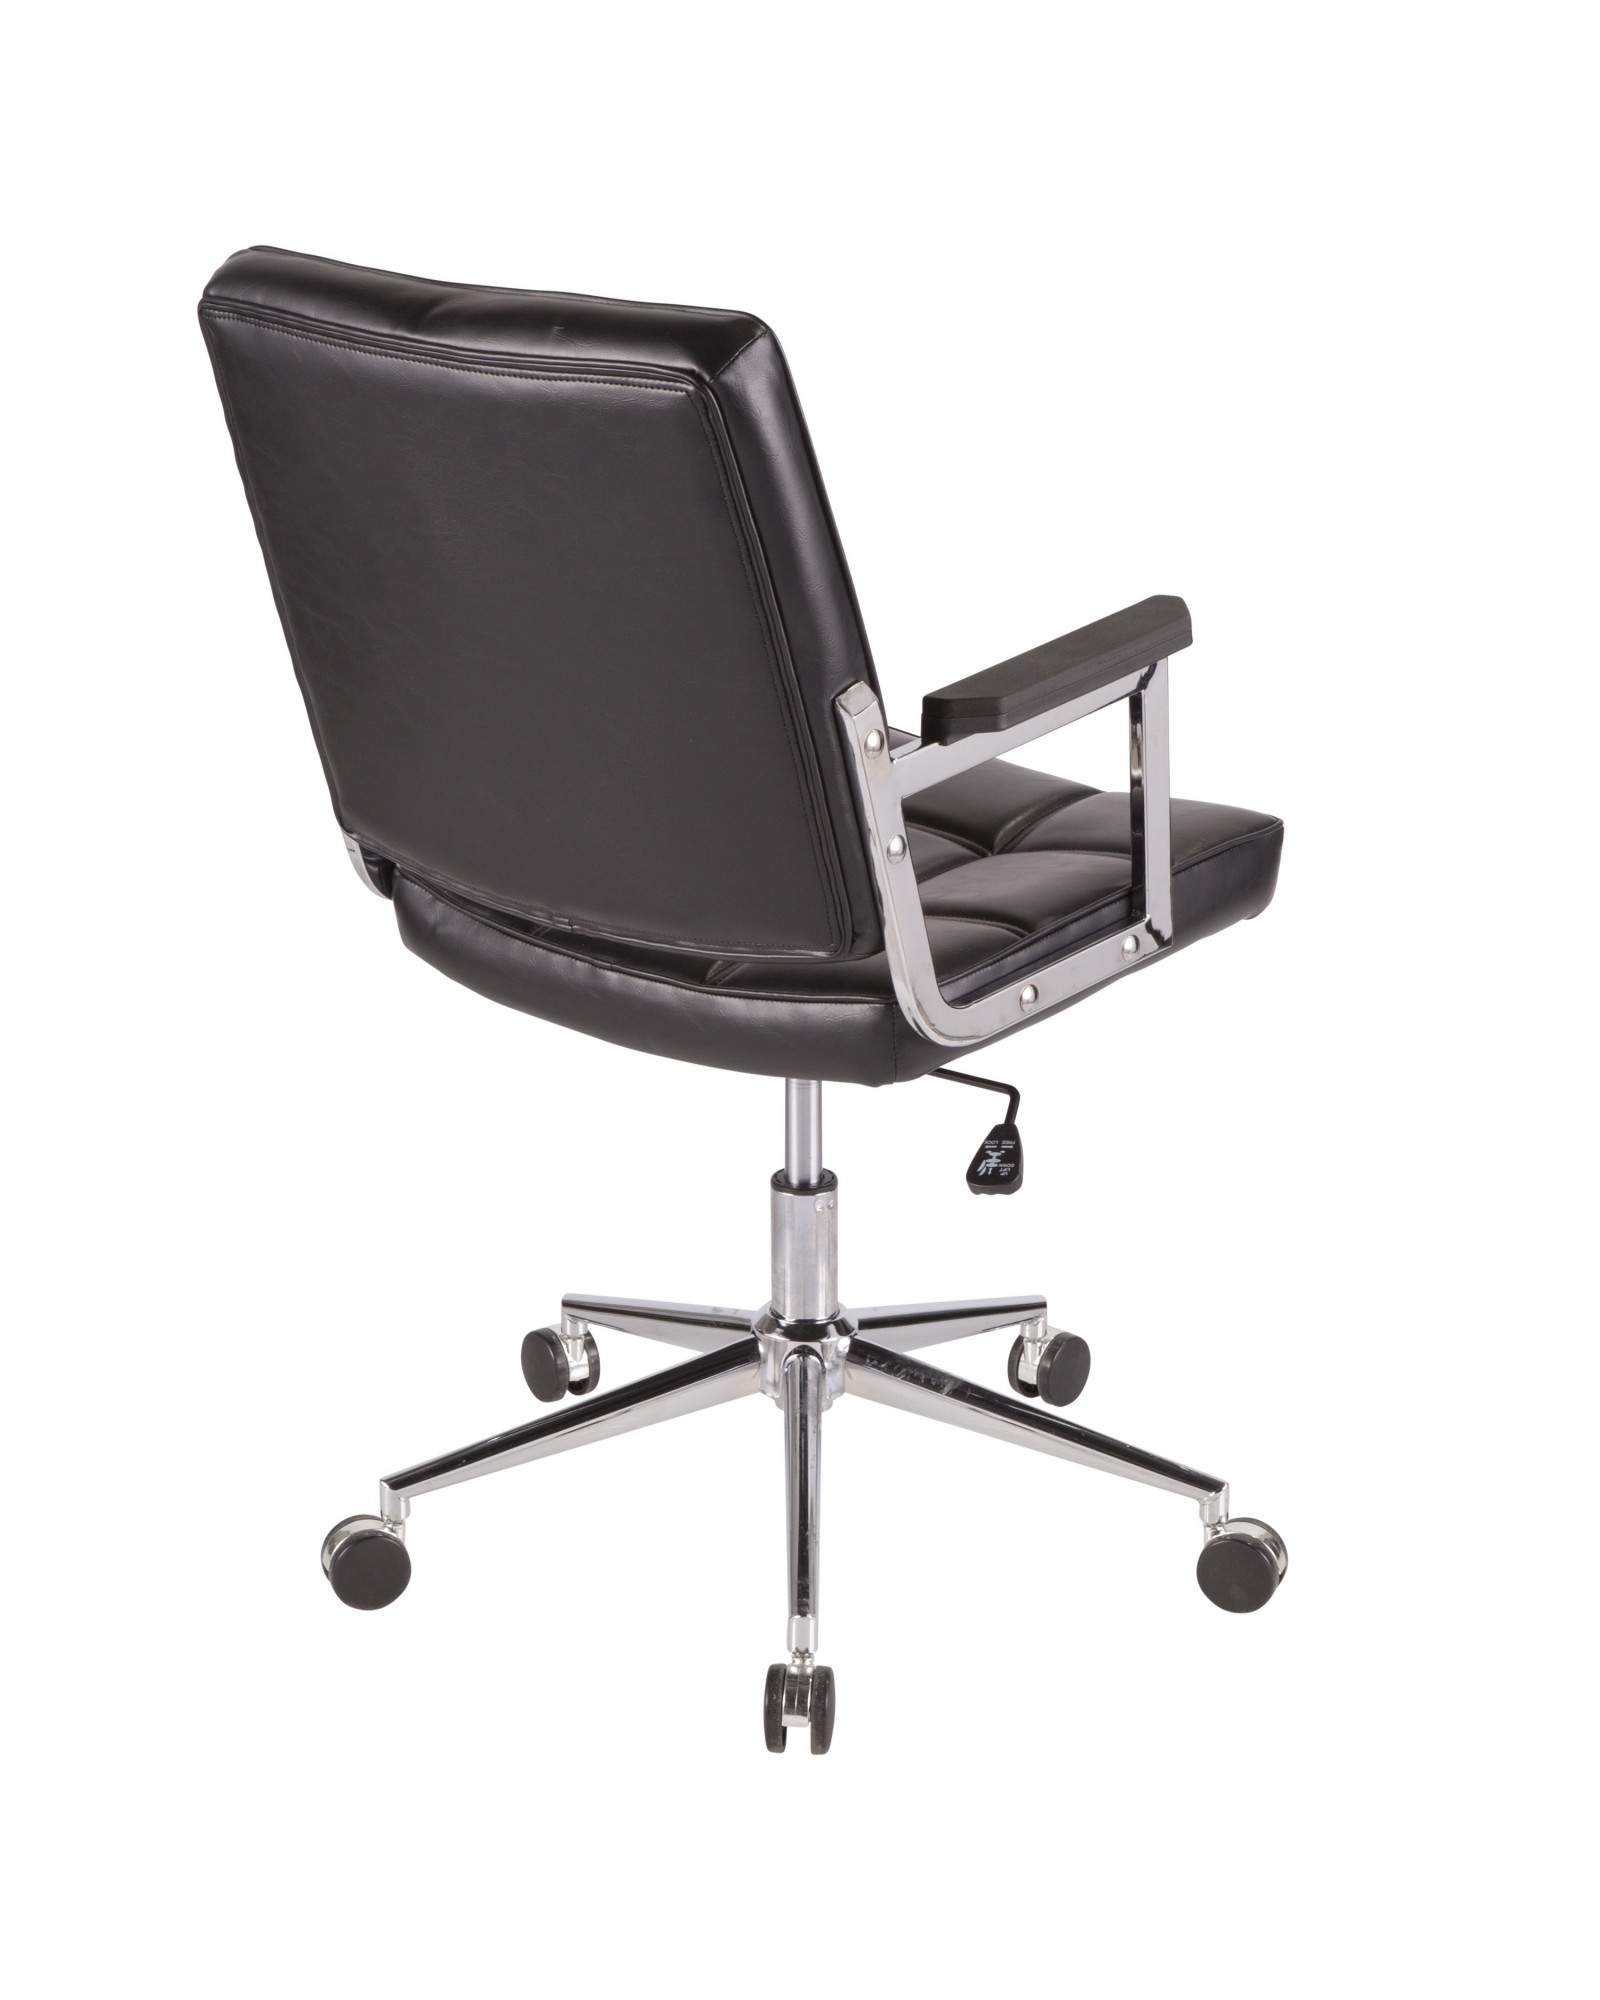 Bureau Contemporary Office Chair with Chrome Metal and Black Faux Leather